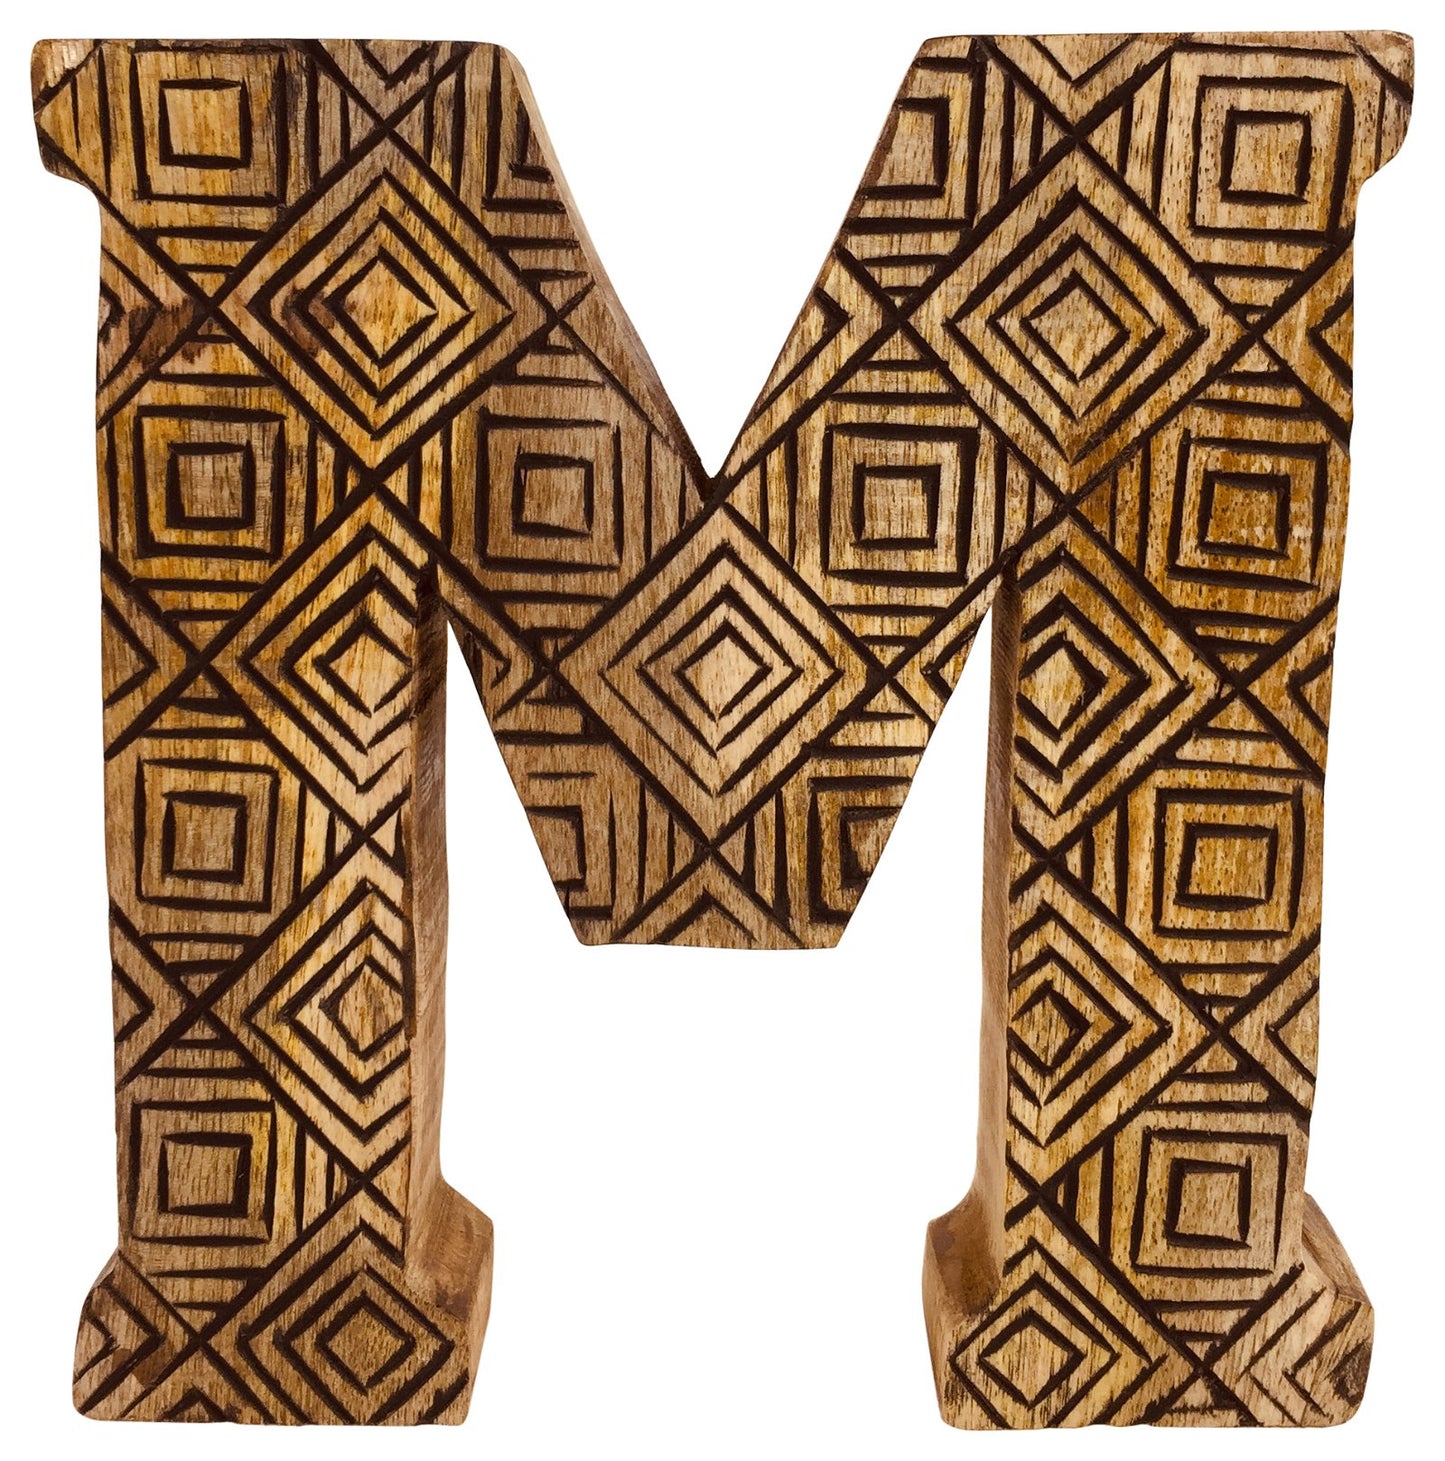 Hand Carved Wooden Geometric Letter M